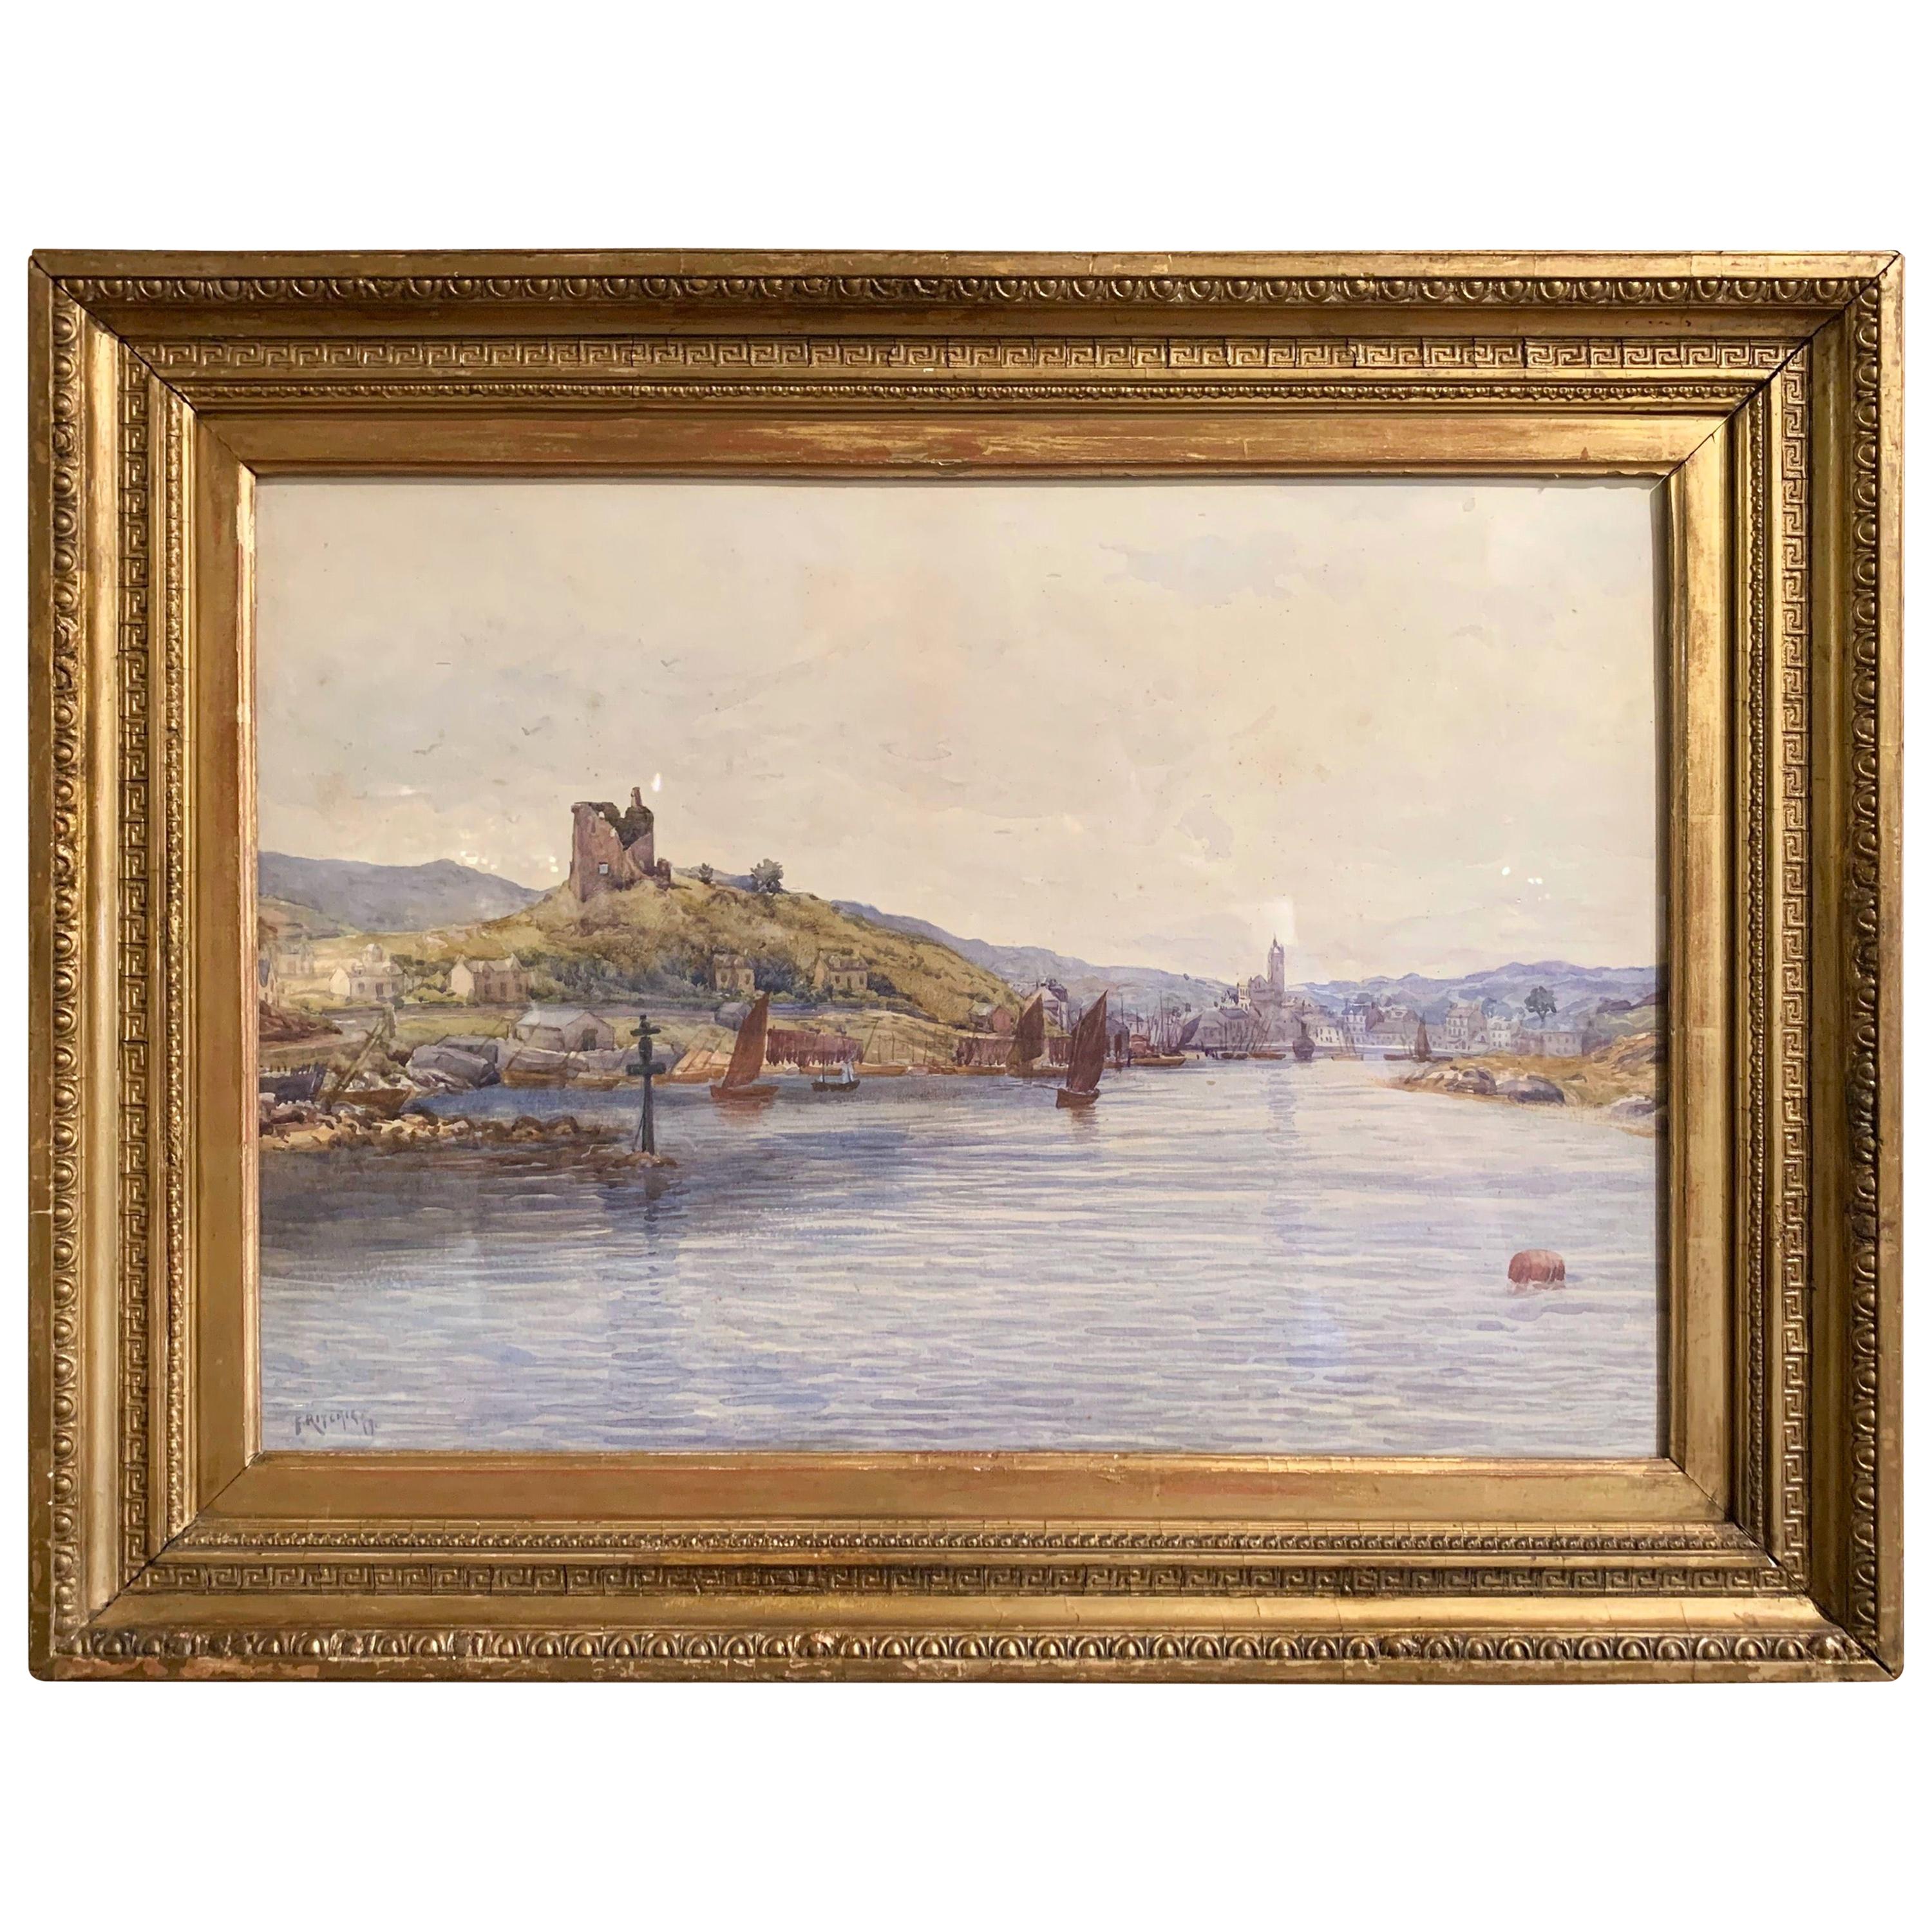 19th Century English Landscape Watercolor in Gilt Frame Signed F. Ritchie, 1890